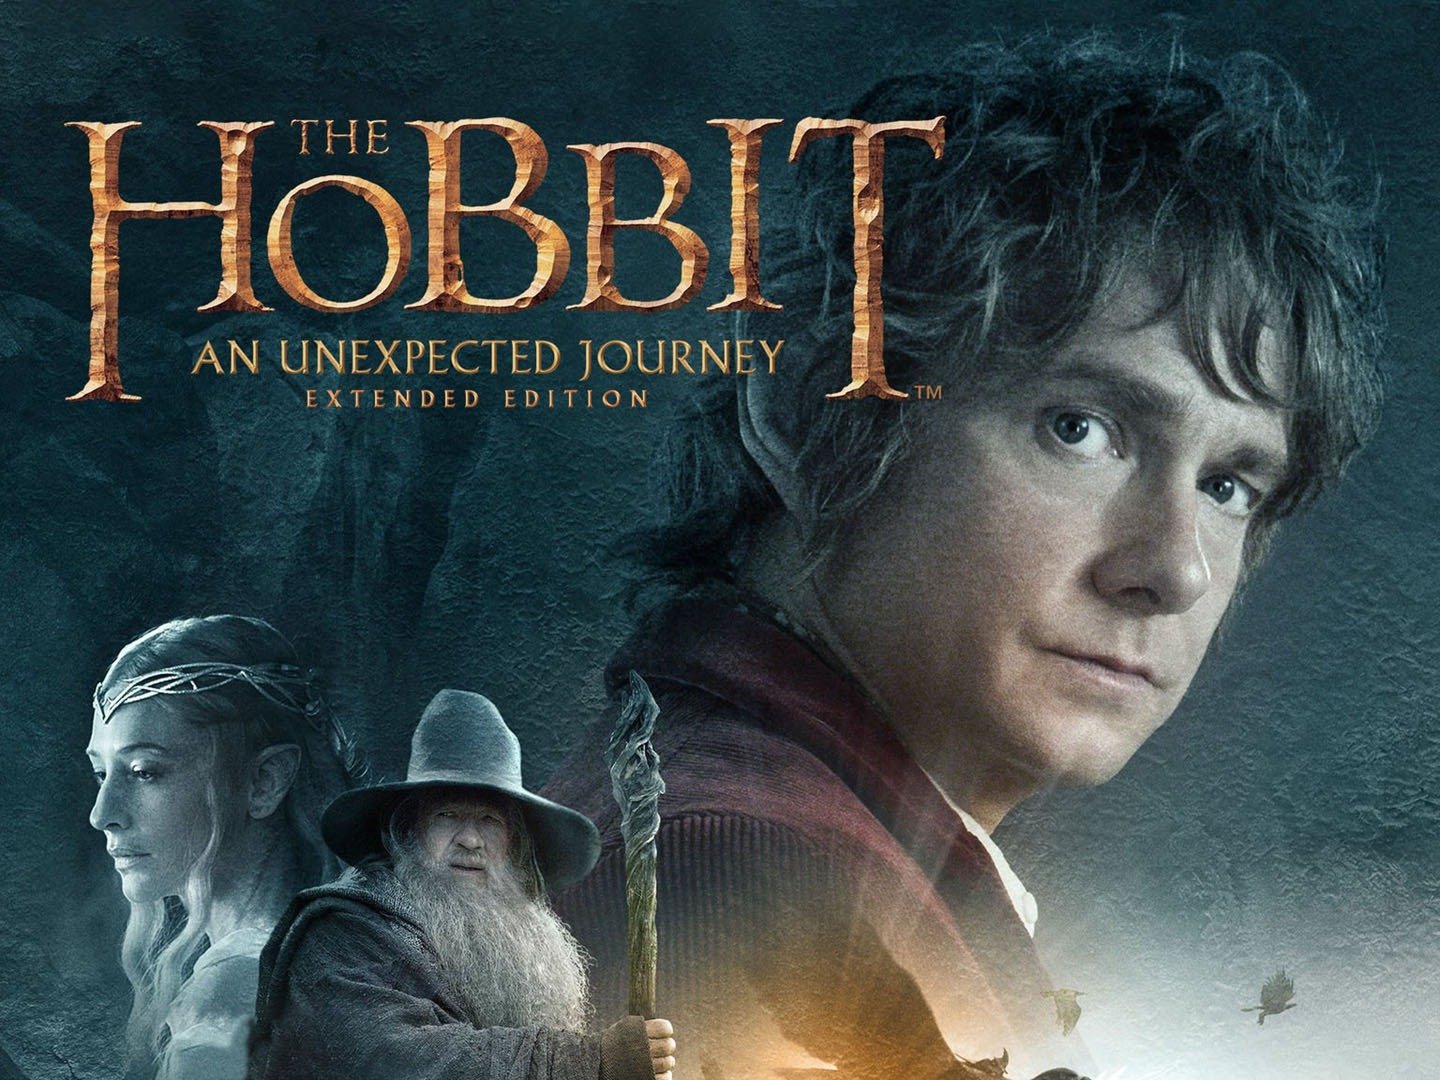 how long is the hobbit unexpected journey extended version